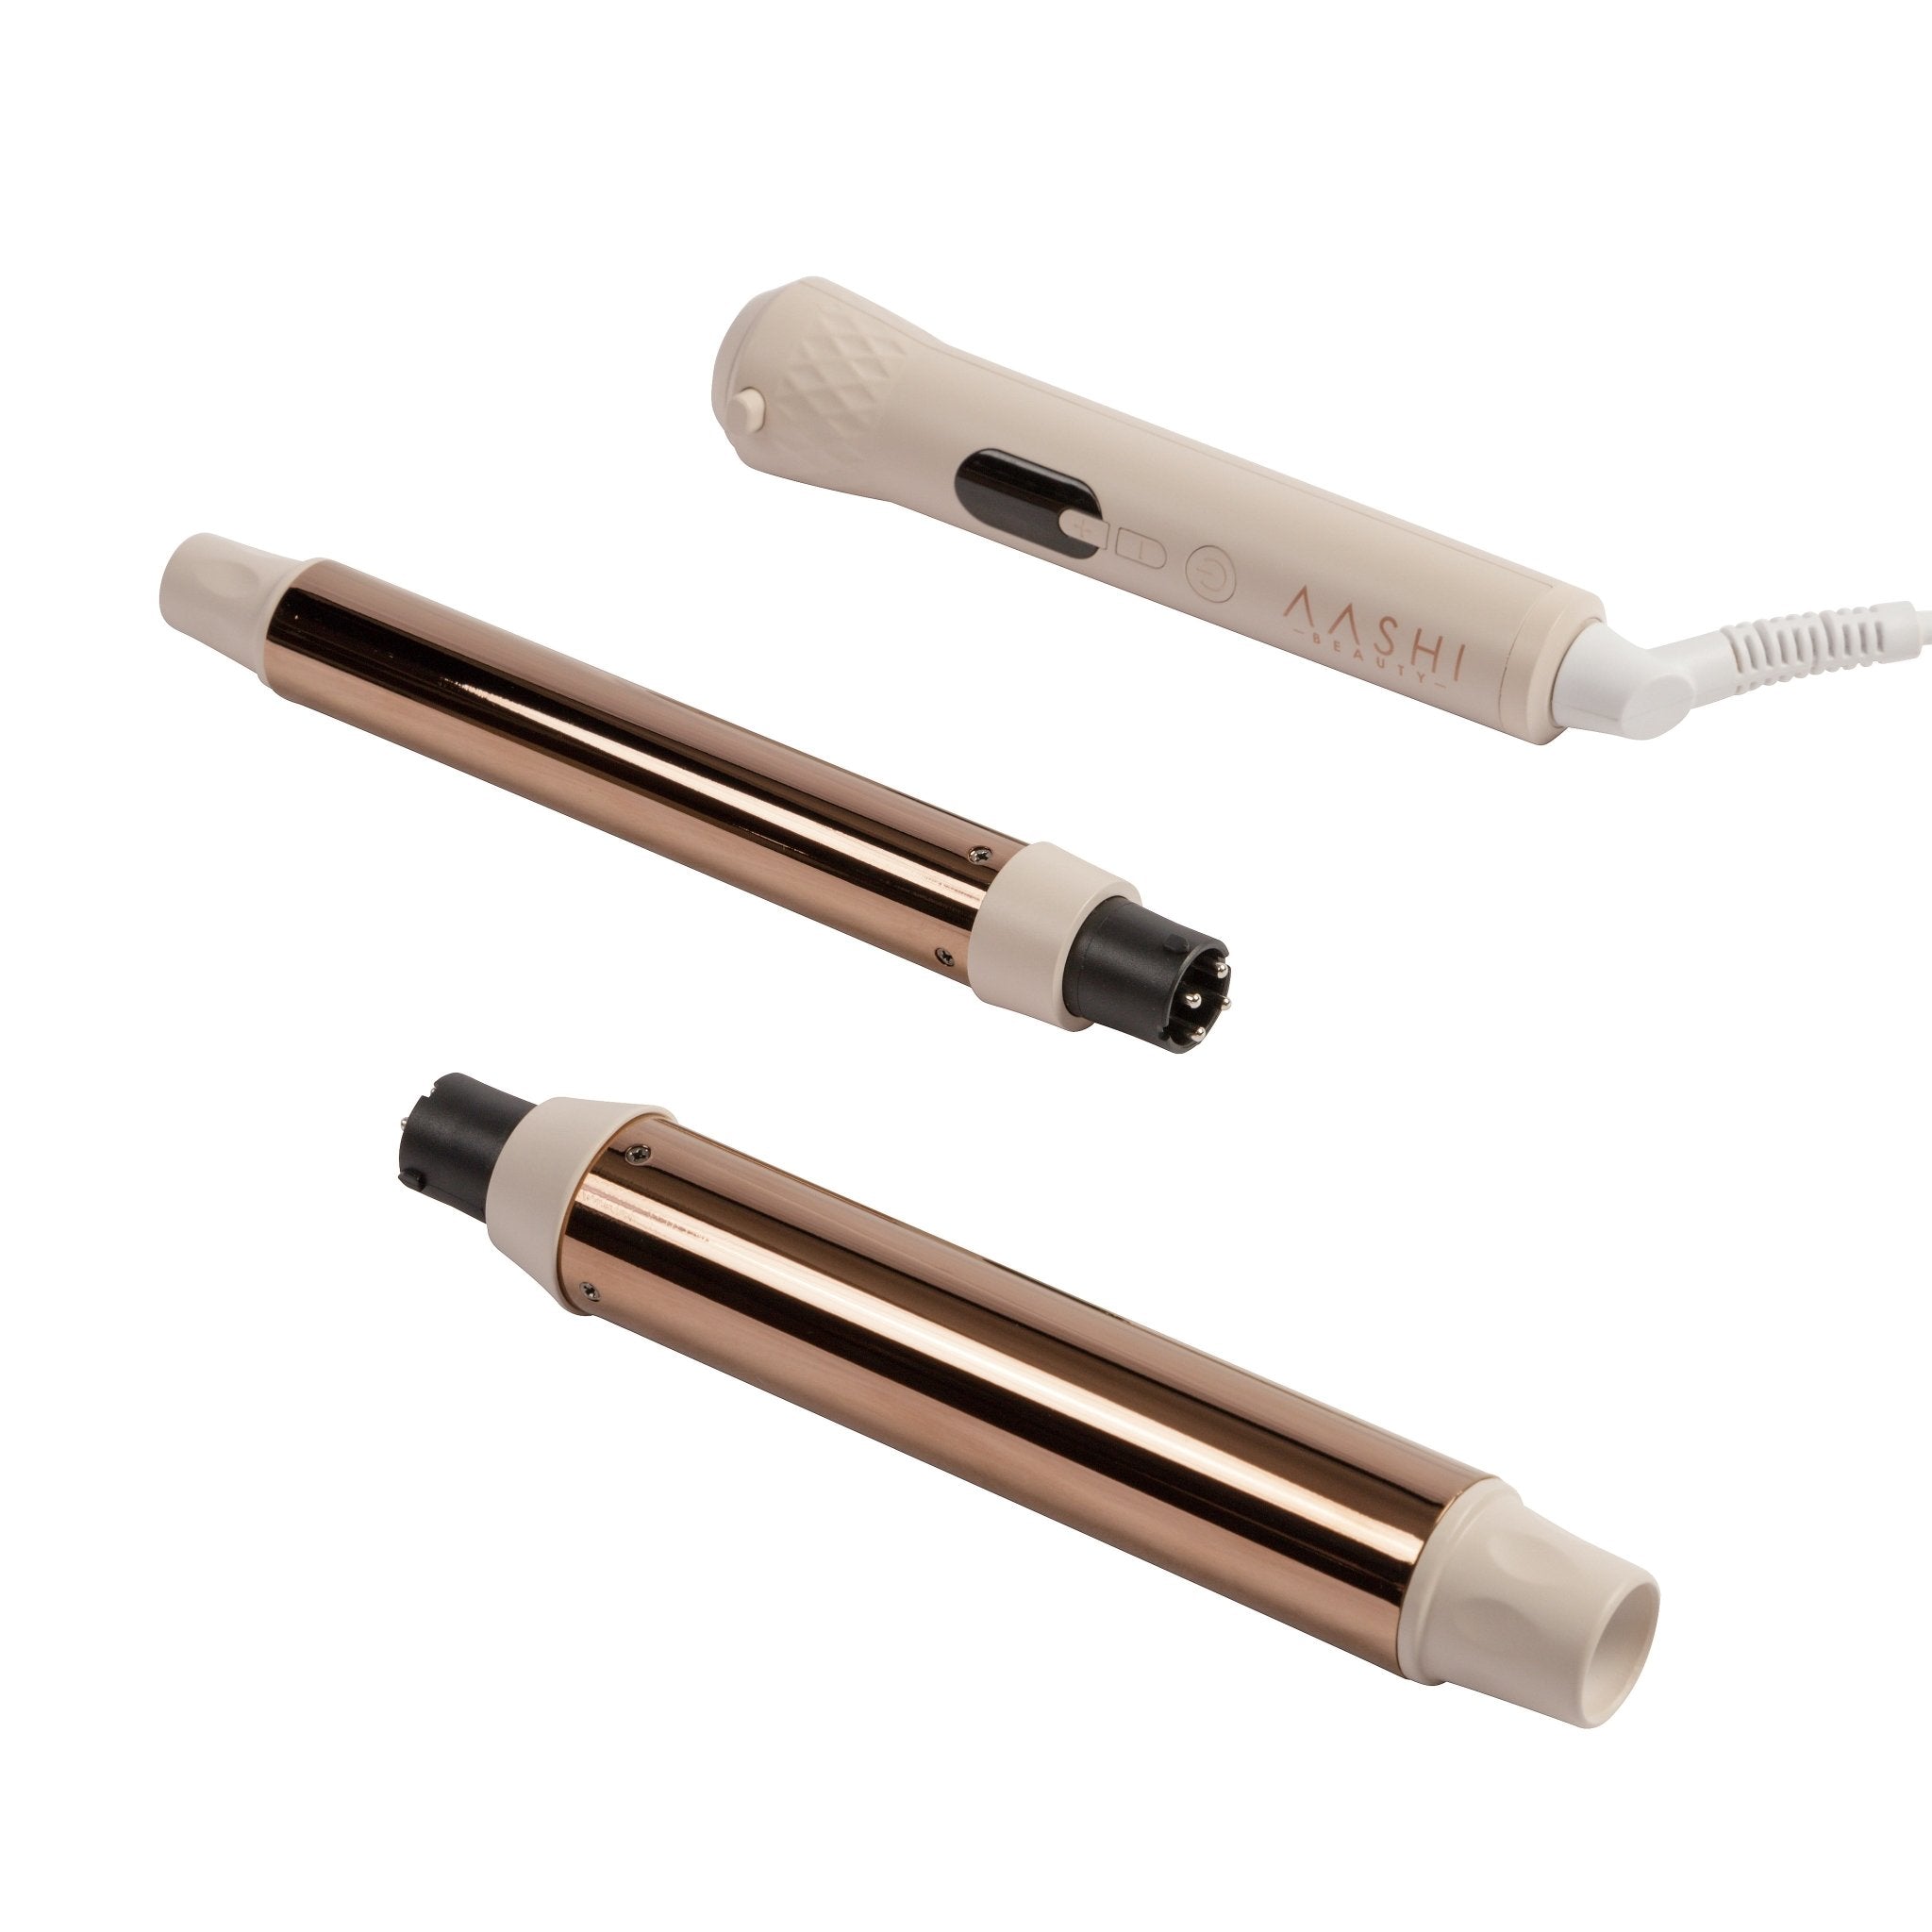 2 in 1 Titanium Curler, 32mm & 25mm (1.25" & 1") Wand Curler - Aashi Beauty